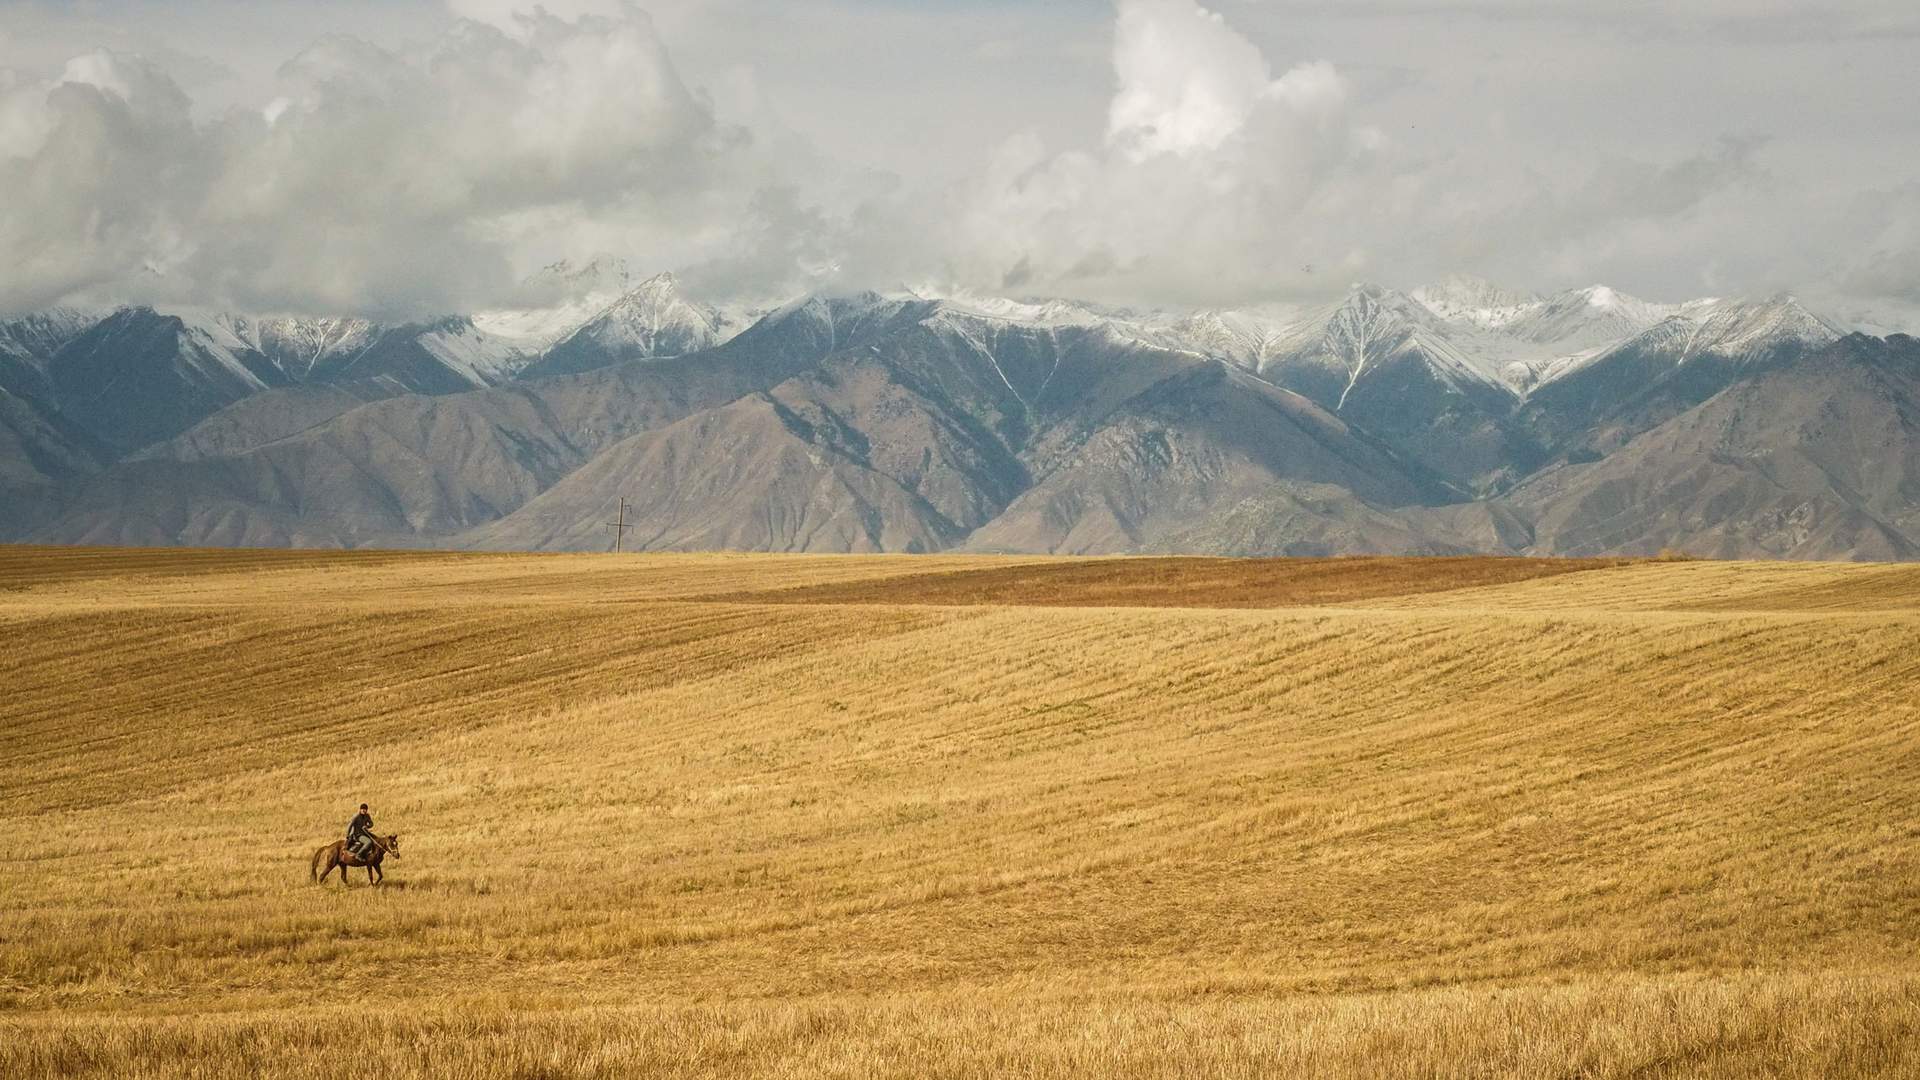 Rancher riding through wheat in Montana with Rocky mountains in background.